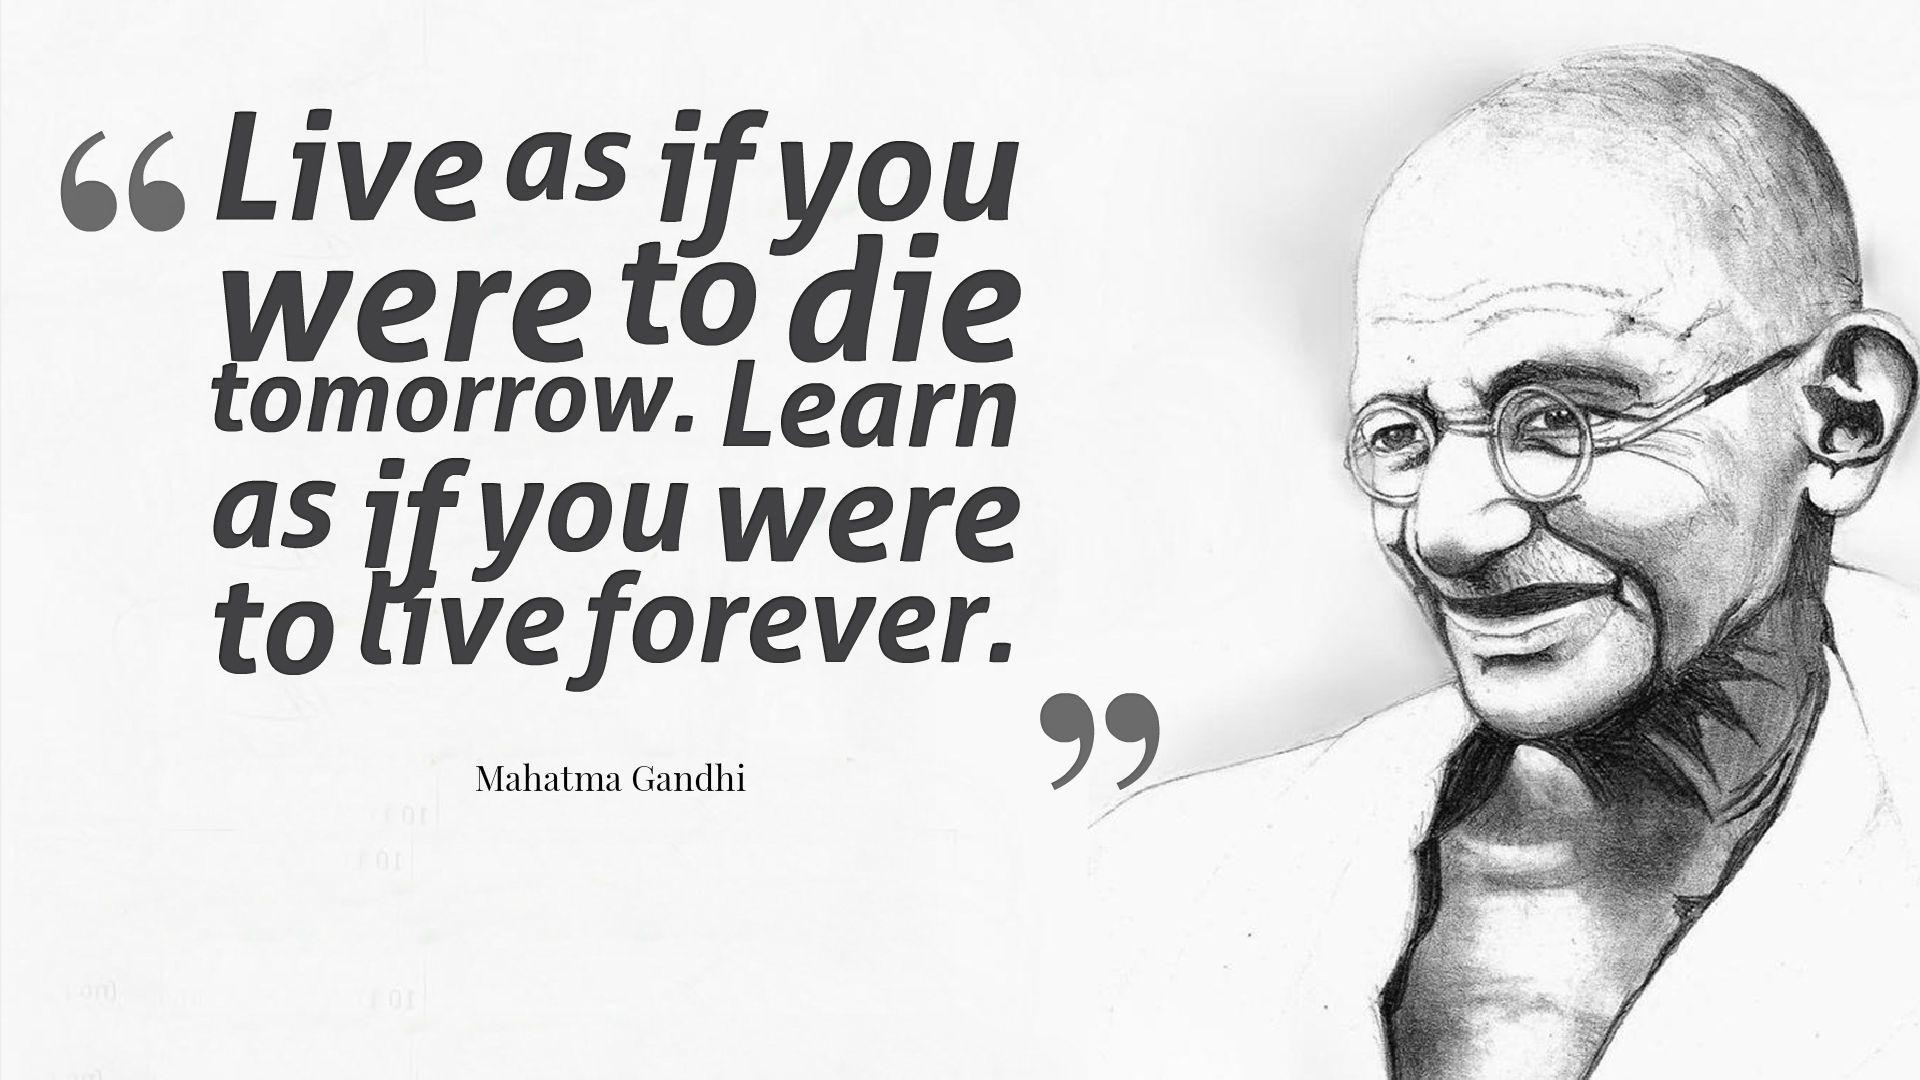 Quotes Mahatma Gandhi Wallpaper. for whom the bell tolls